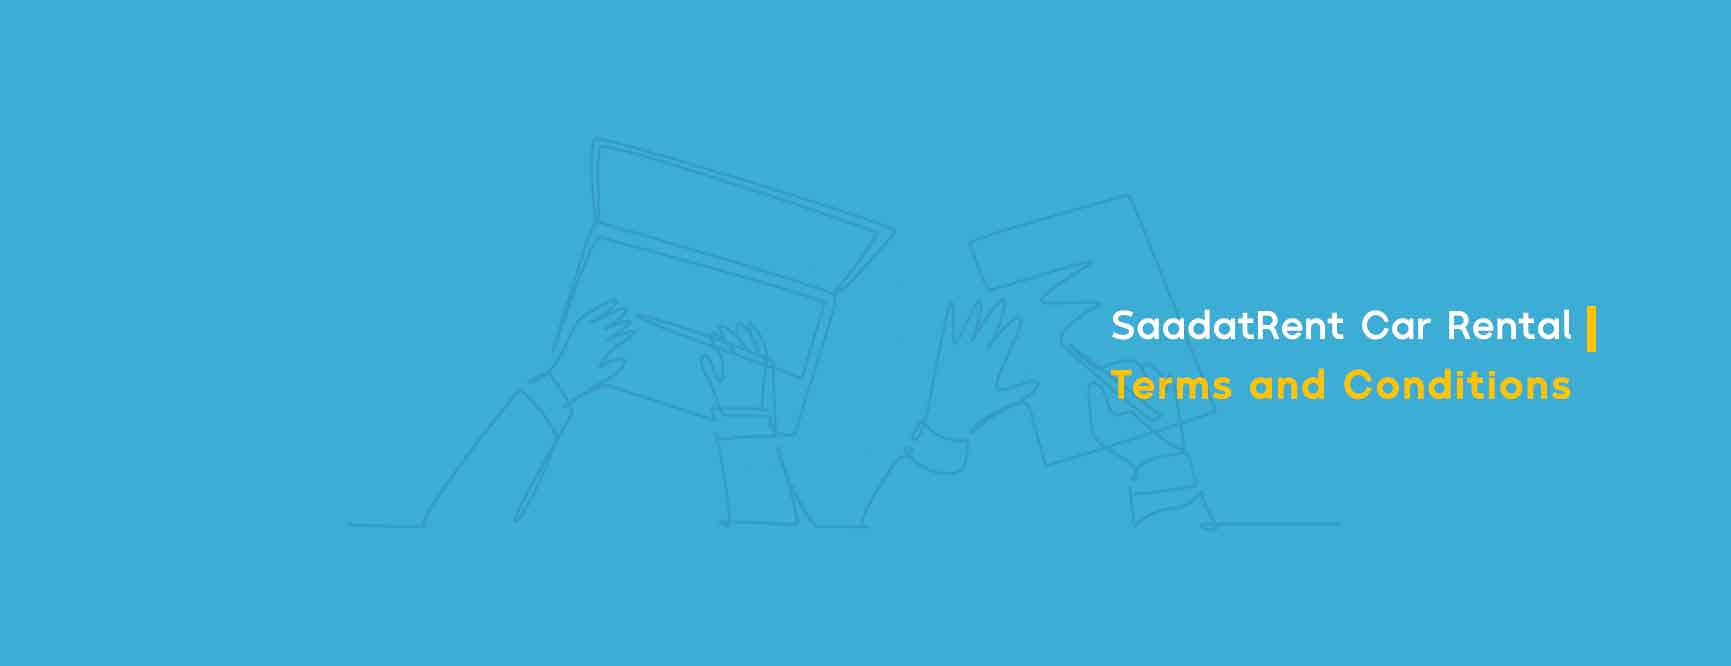 Terms and conditions - Saadatrent